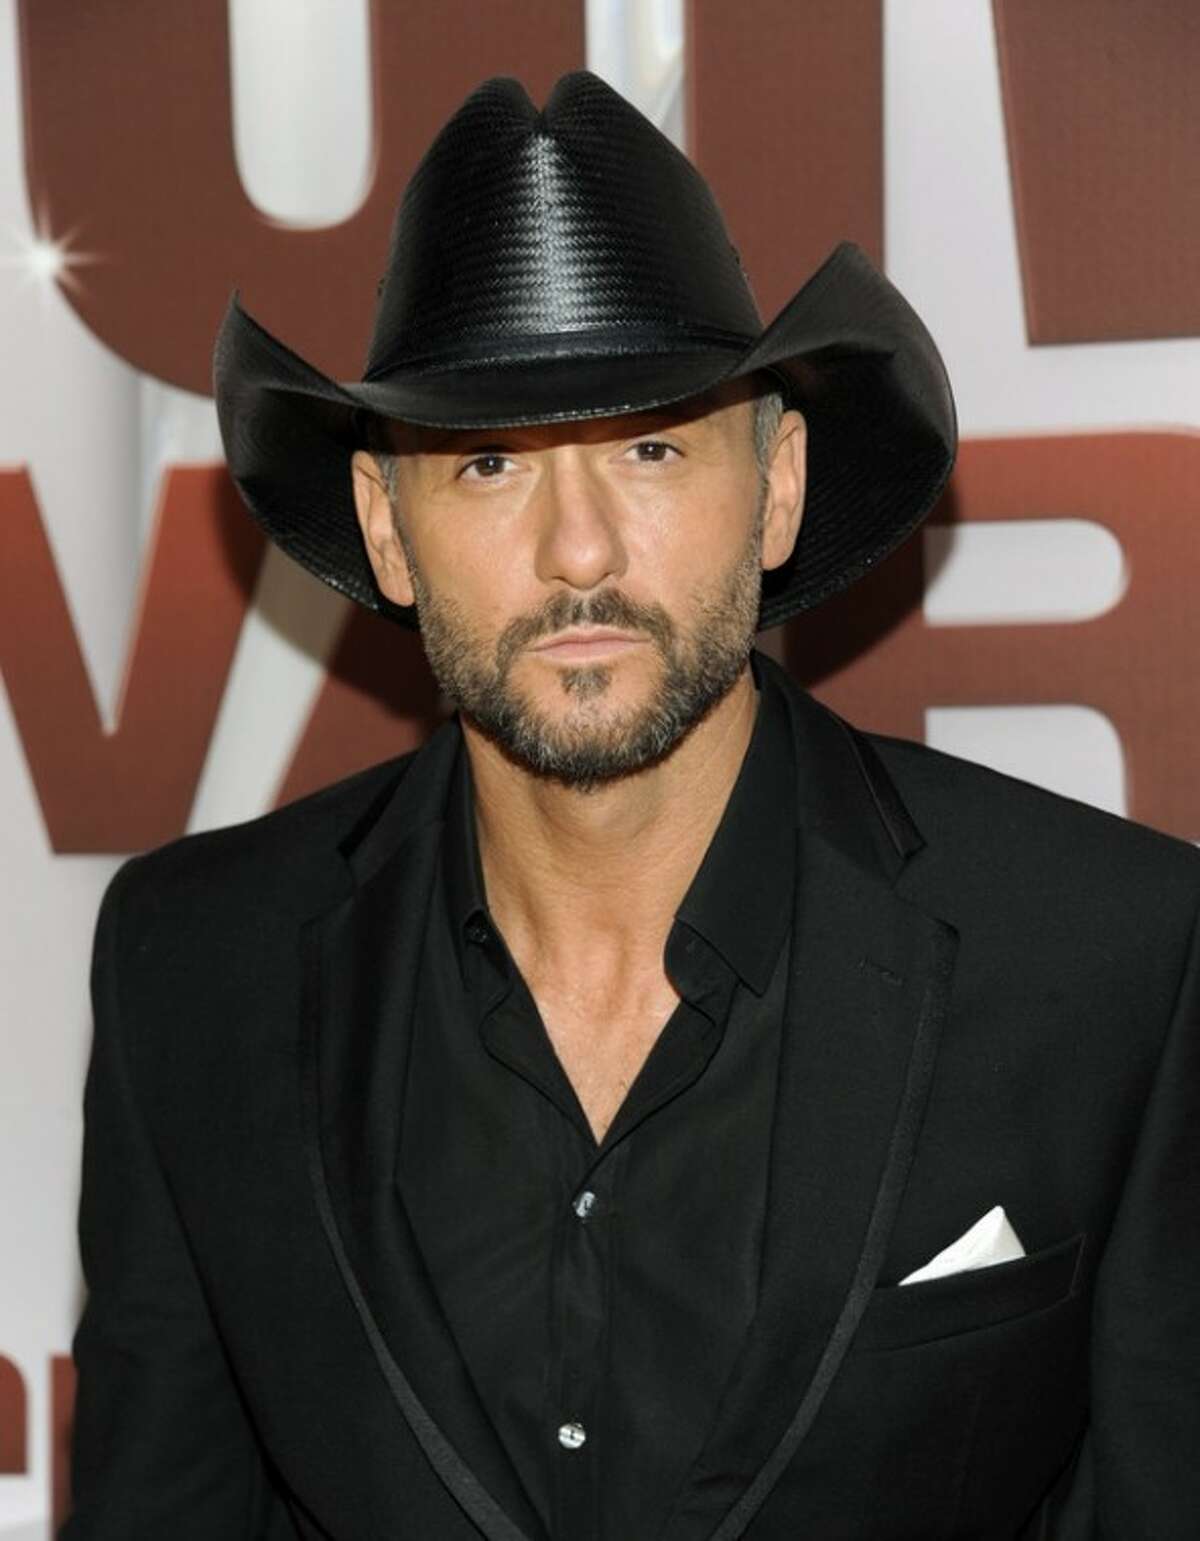 Ap photo In this Nov. 9, 2011 file photo, country singer Tim McGraw arrives at the 45th Annual CMA Awards in Nashville, Tenn.